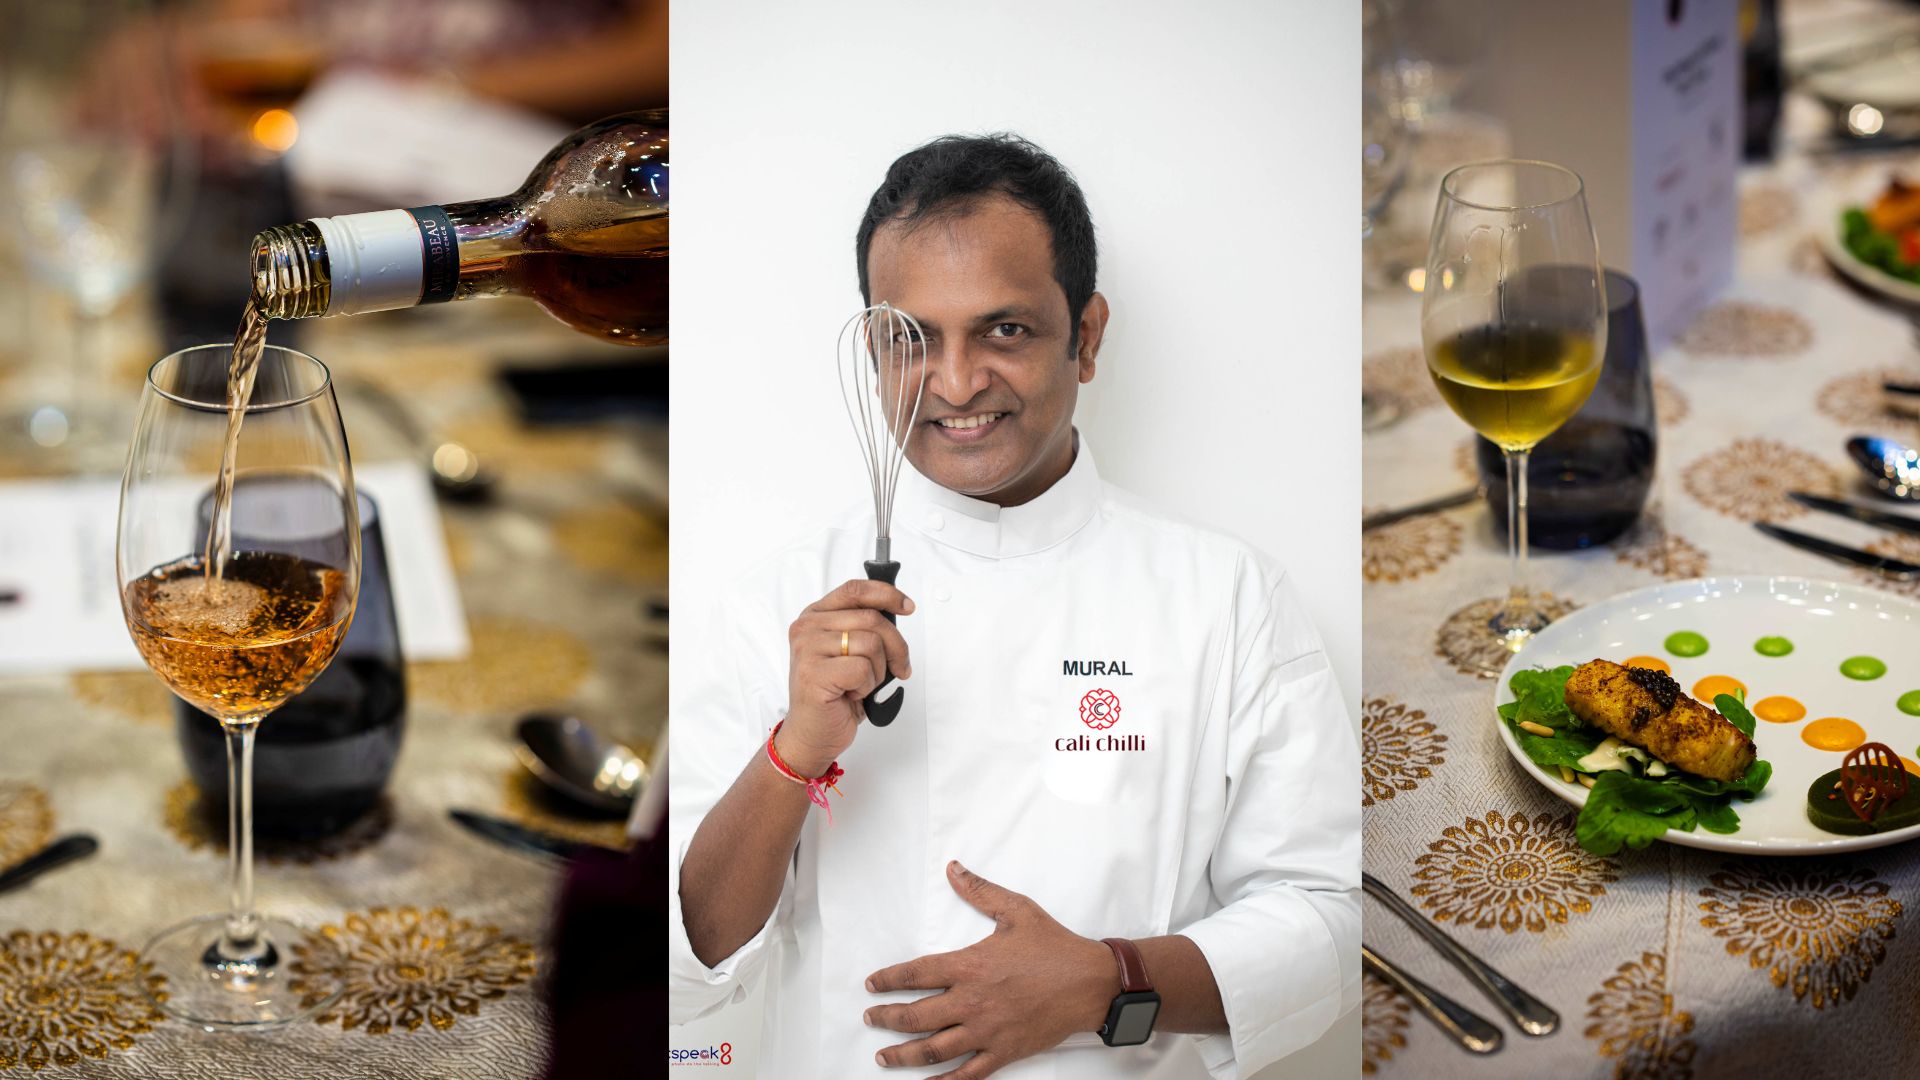 Roseate Hotels & Resorts and All Things Nice present fine dining experience with renowned Chef Manjunath Mural 